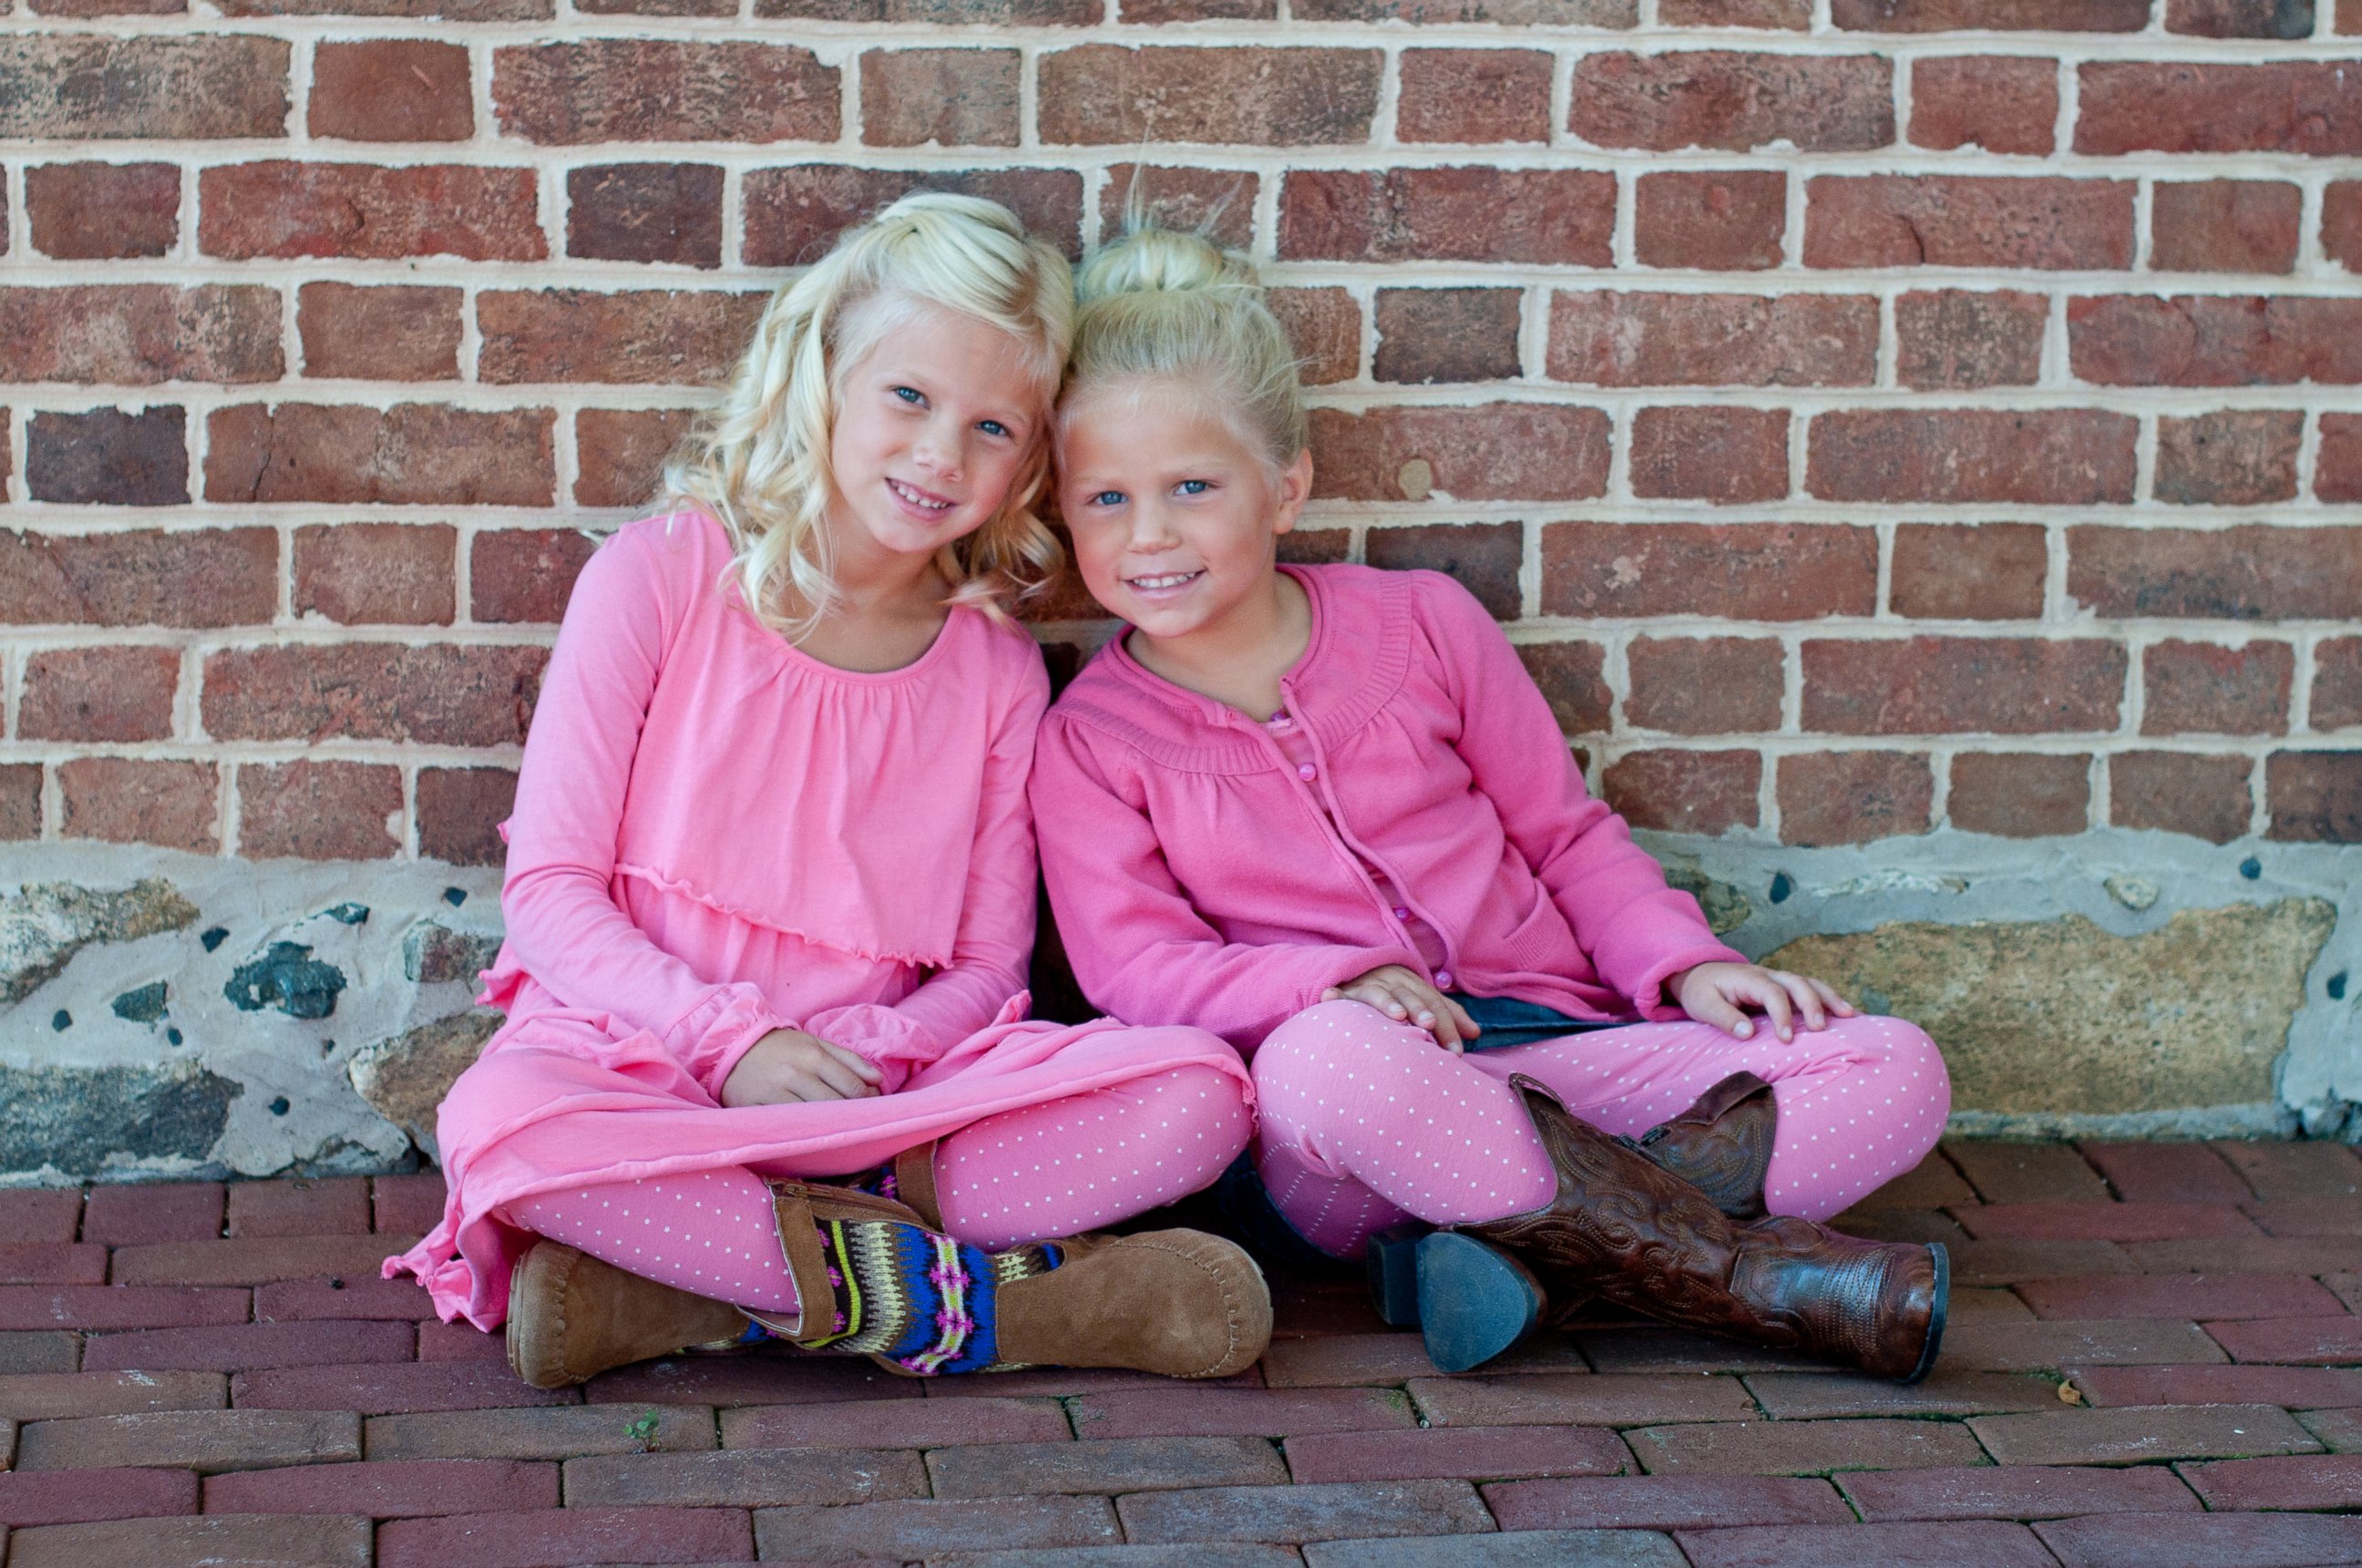 PHOTO: Lexi and Katie Boone, pictured here, were believed to be in an Annapolis, Maryland, mansion with their grandparents, Don and Sandra Pyle, when it burned to the ground on Monday, Jan. 19, 2015.